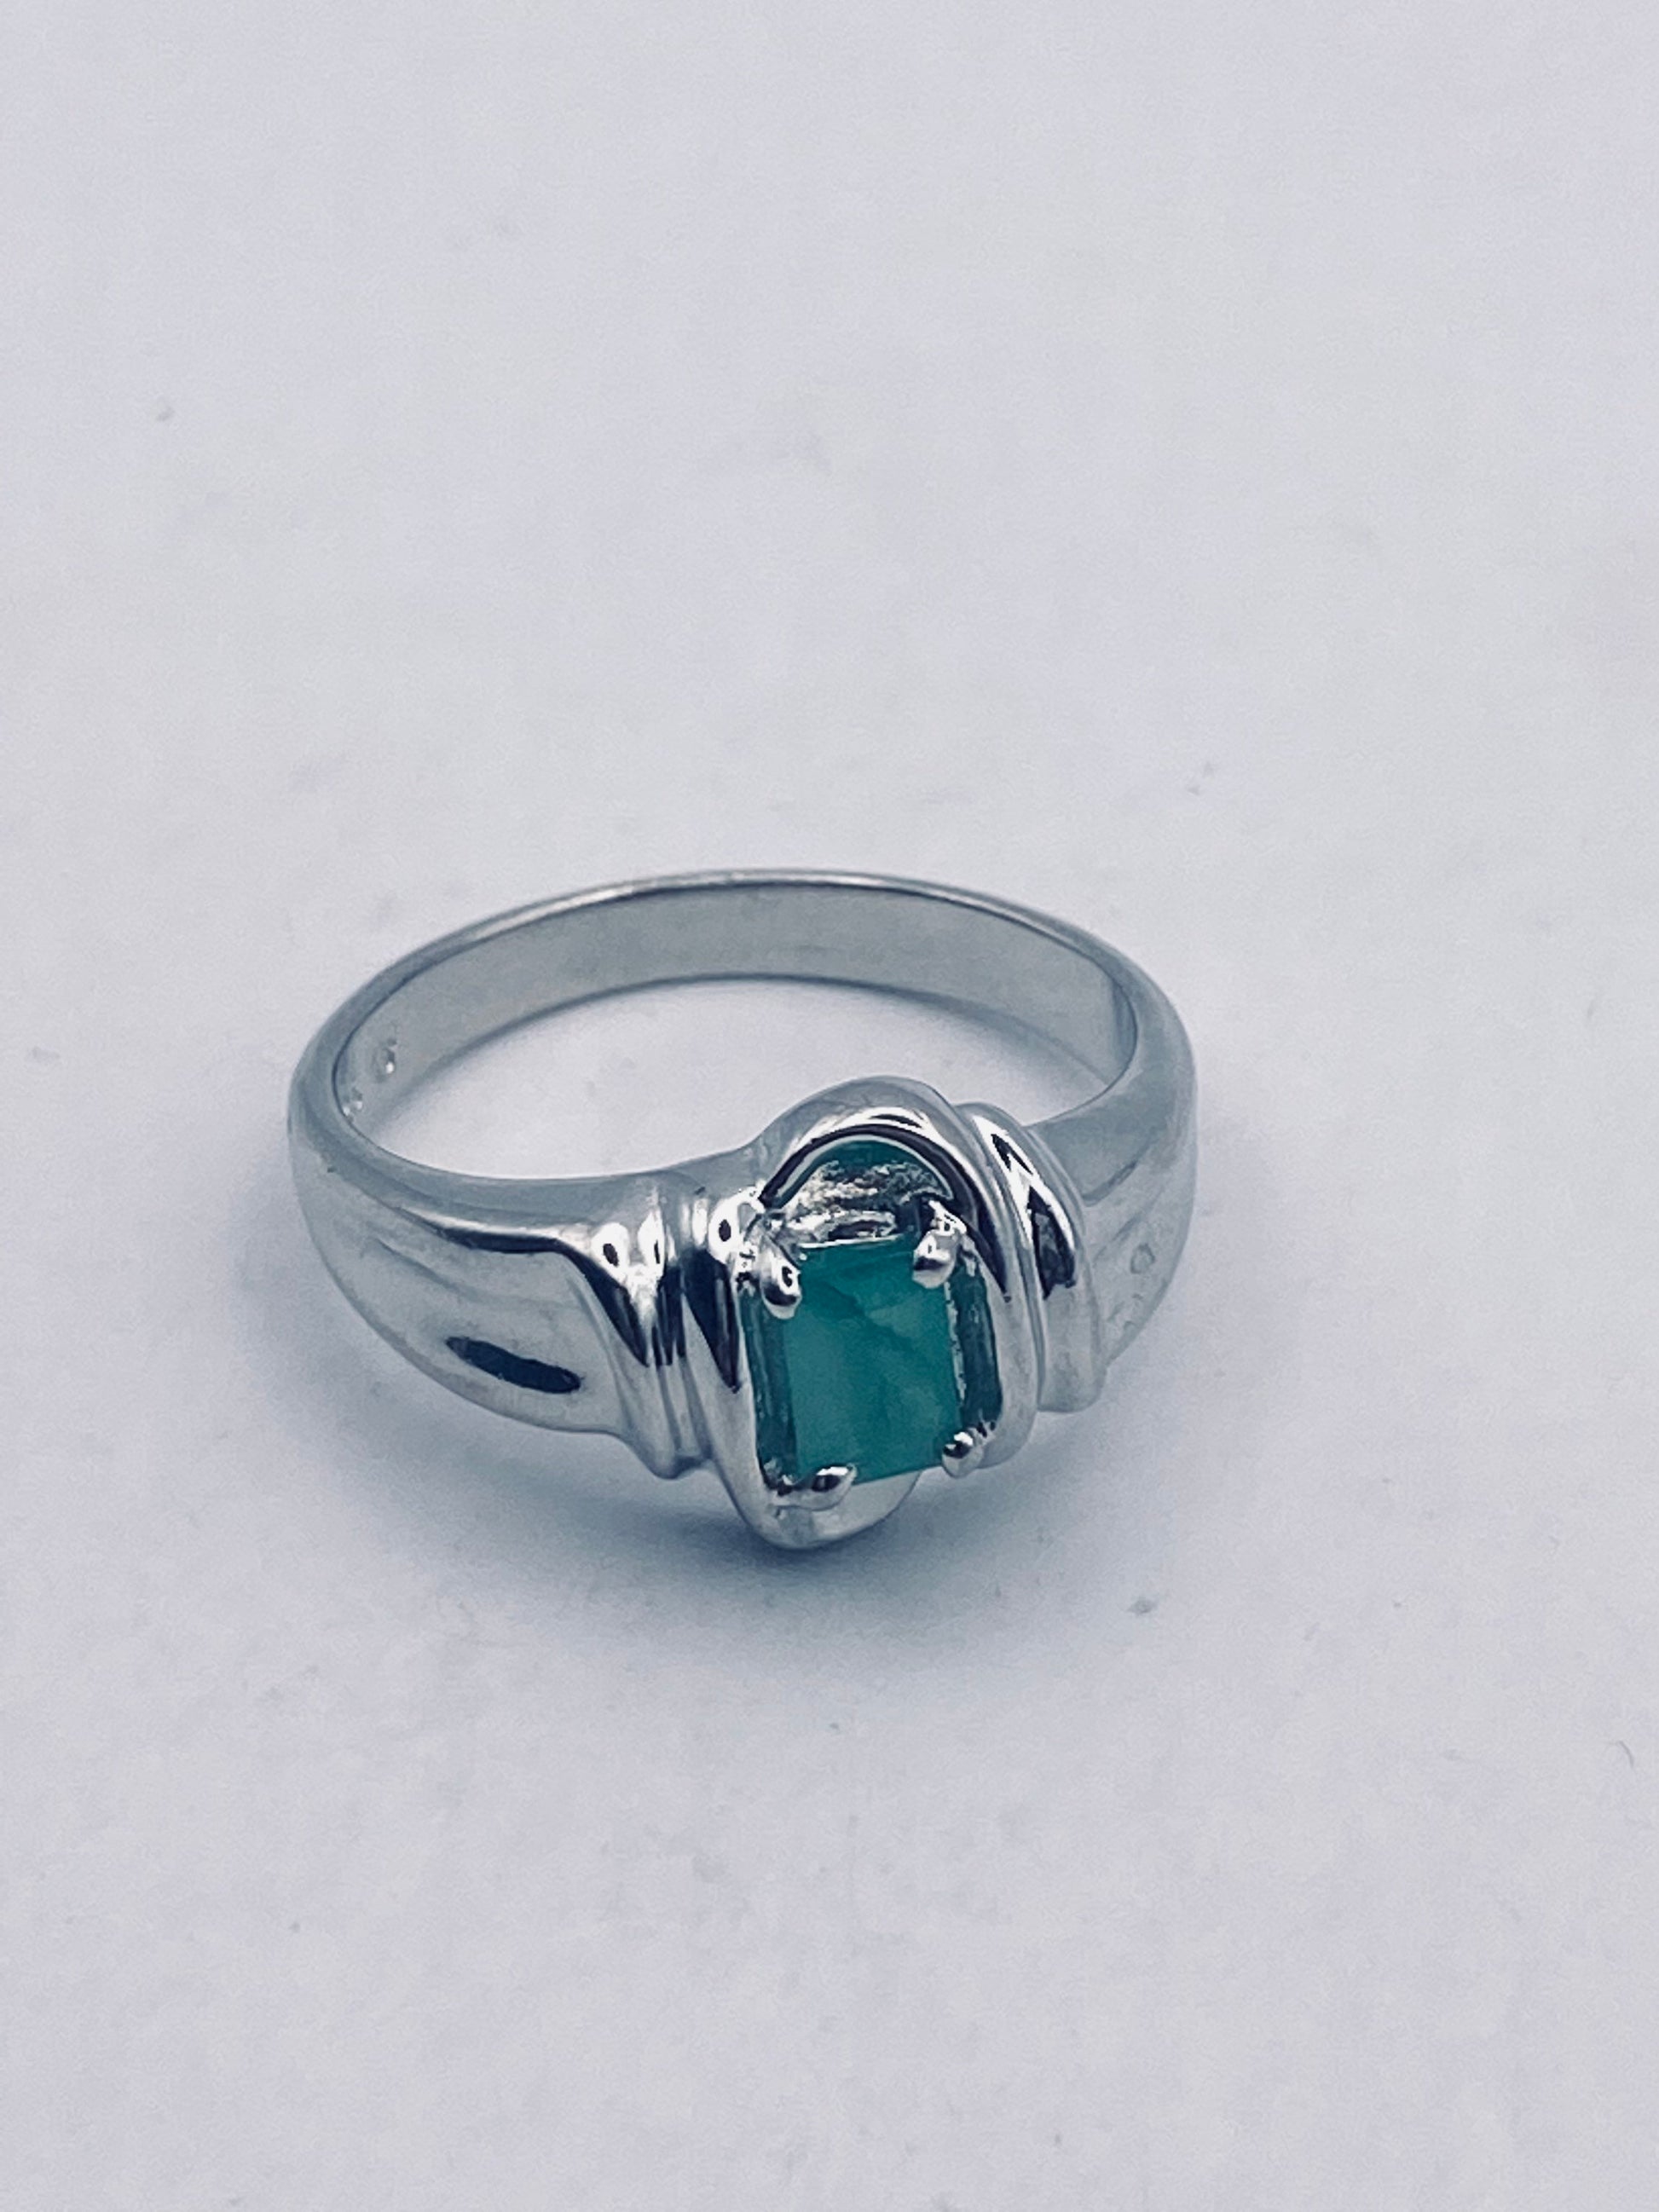 Vintage Genuine Green Emerald Setting 925 Sterling Silver Band Ring